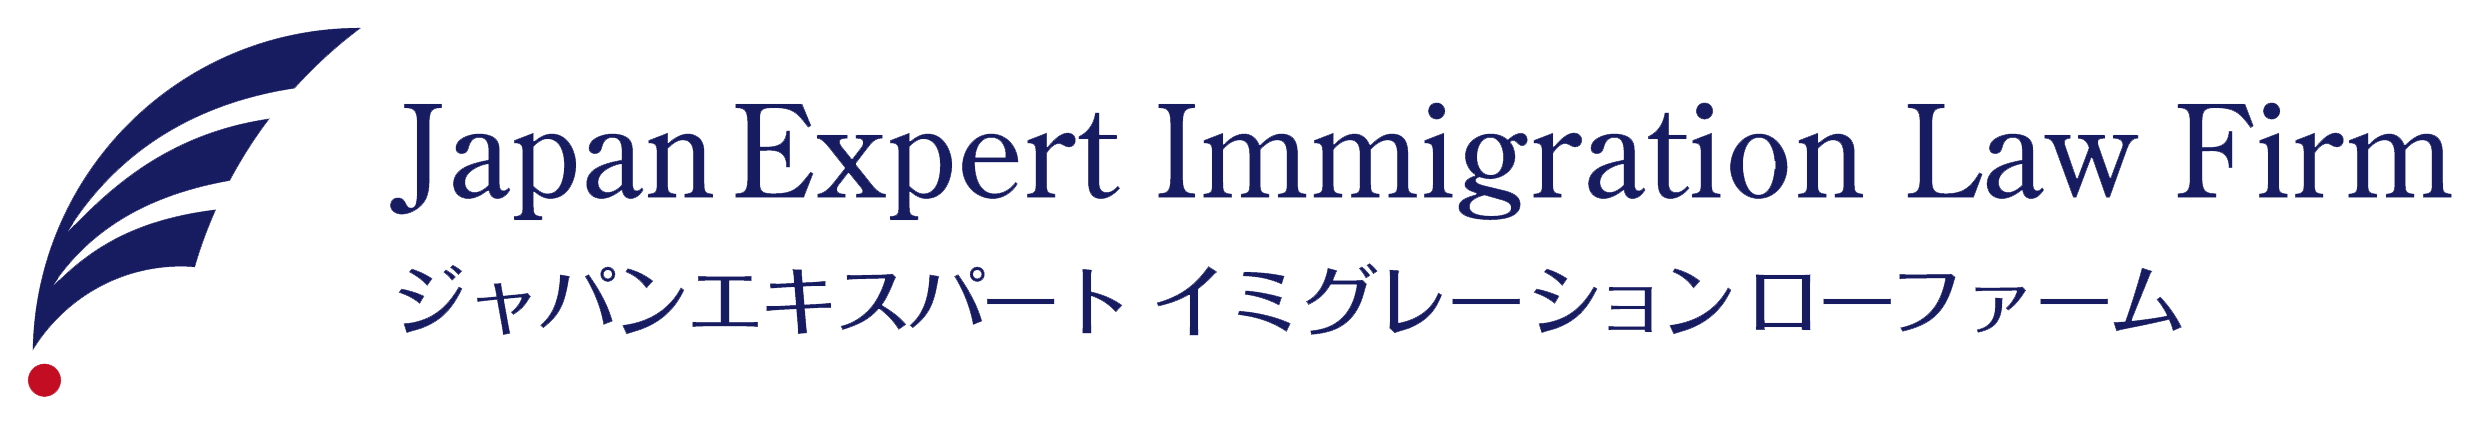 Privacy-Policy｜行政書士法人Japan Expert Immigration Law Firm